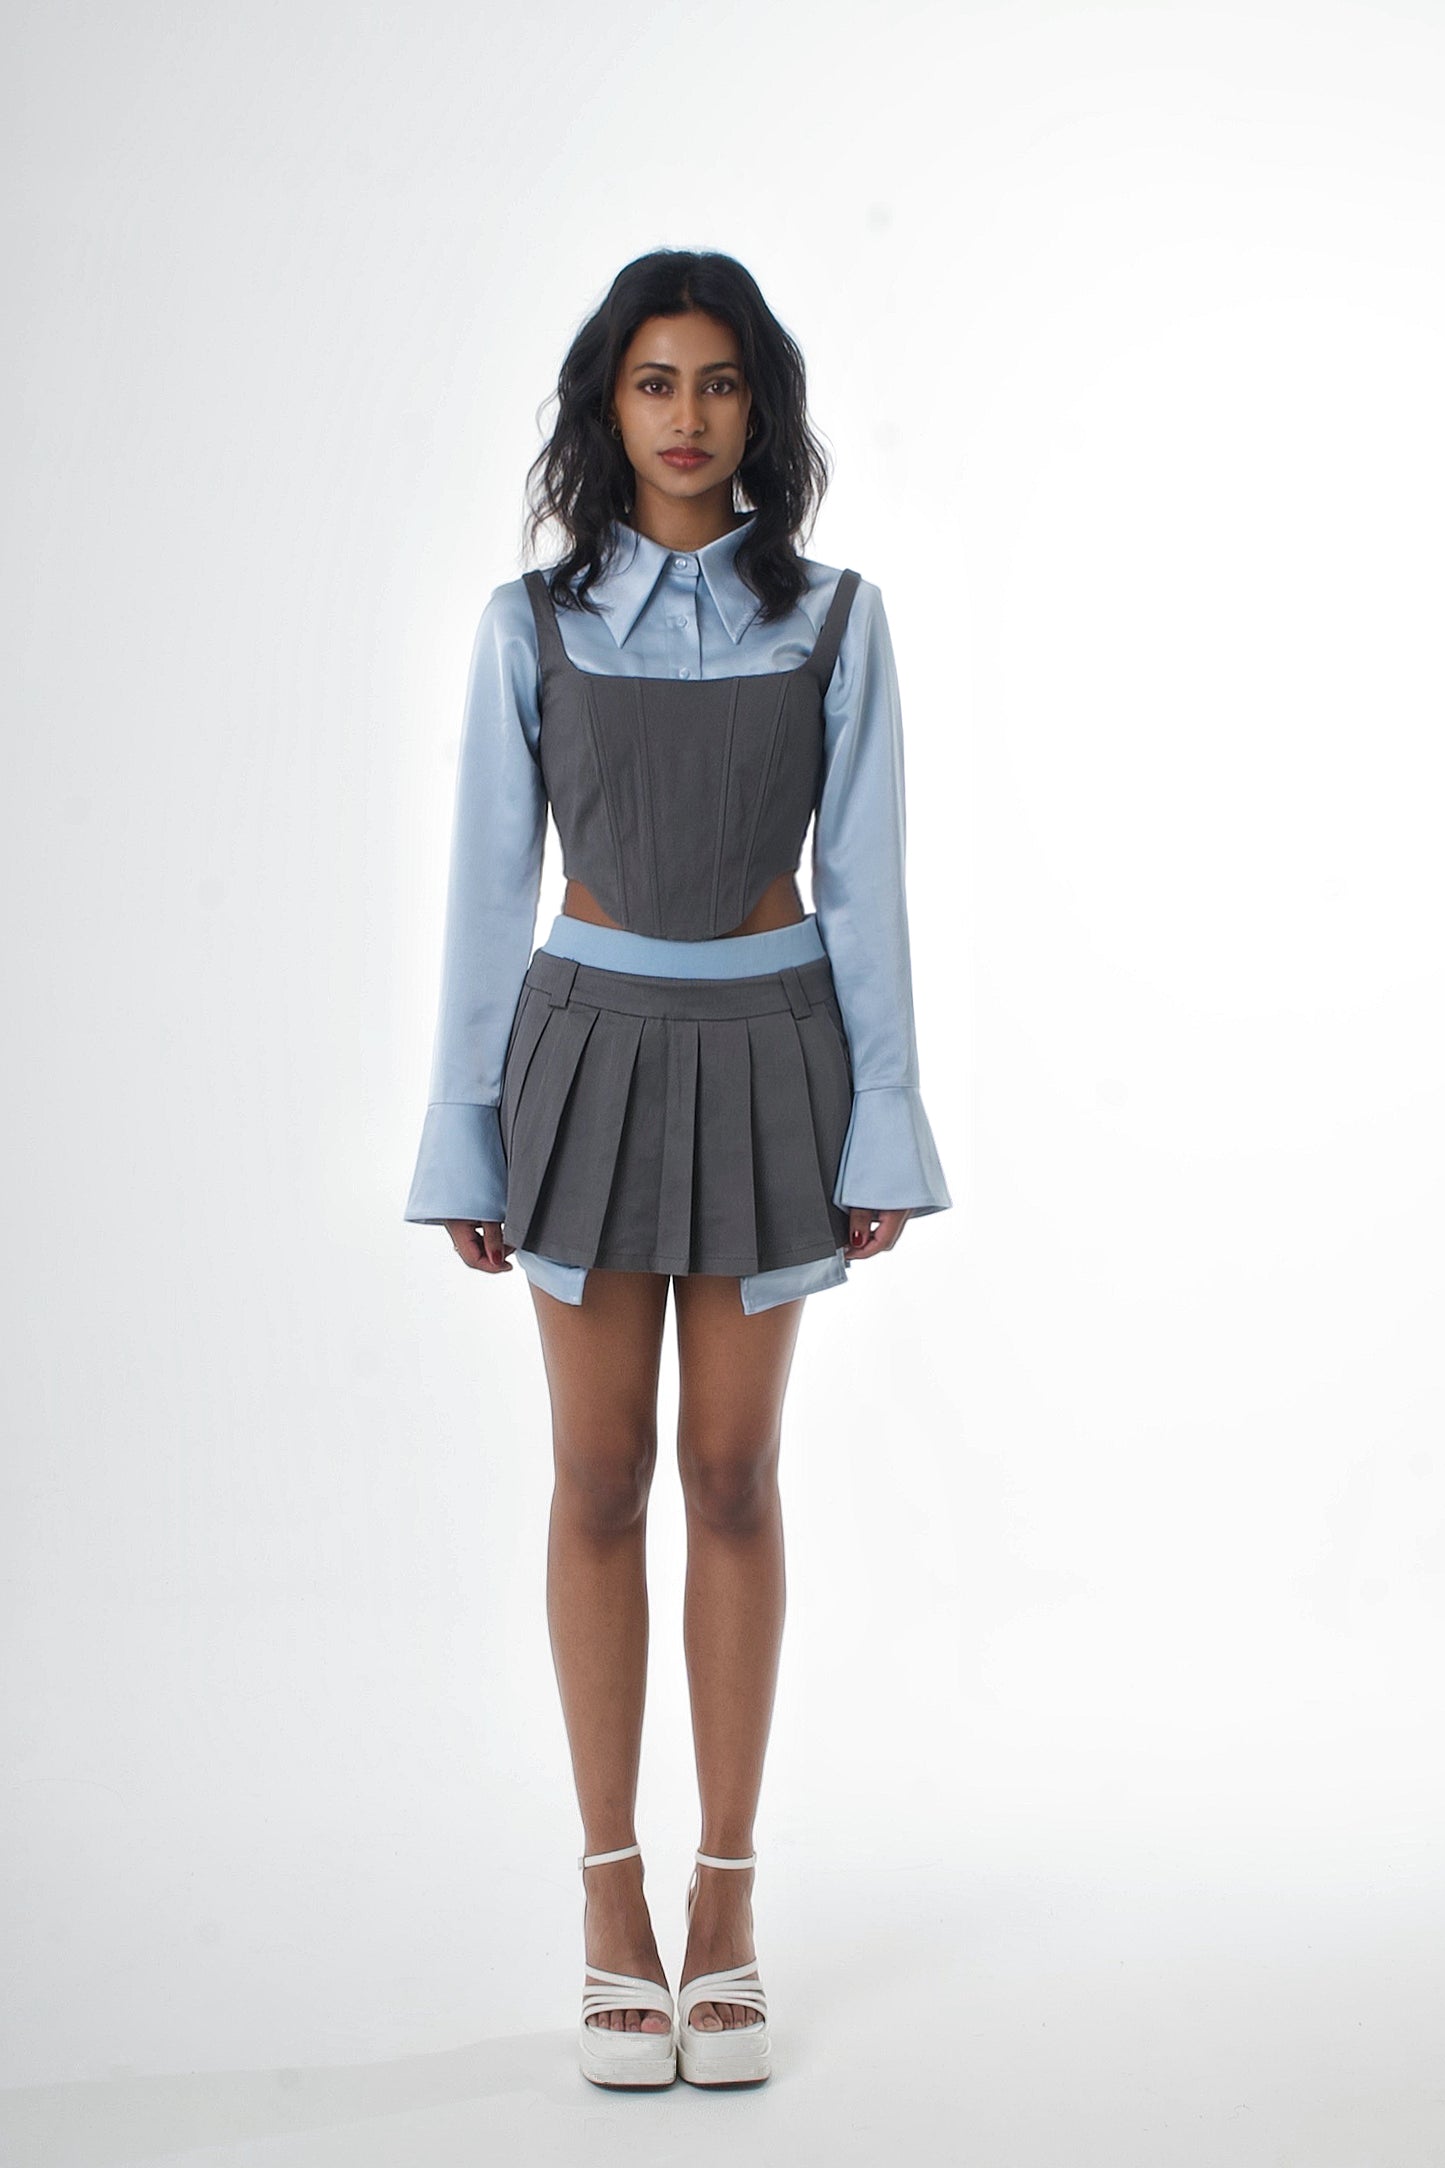 Mid-rise Grey Pleated Skirt Built-in Shorts